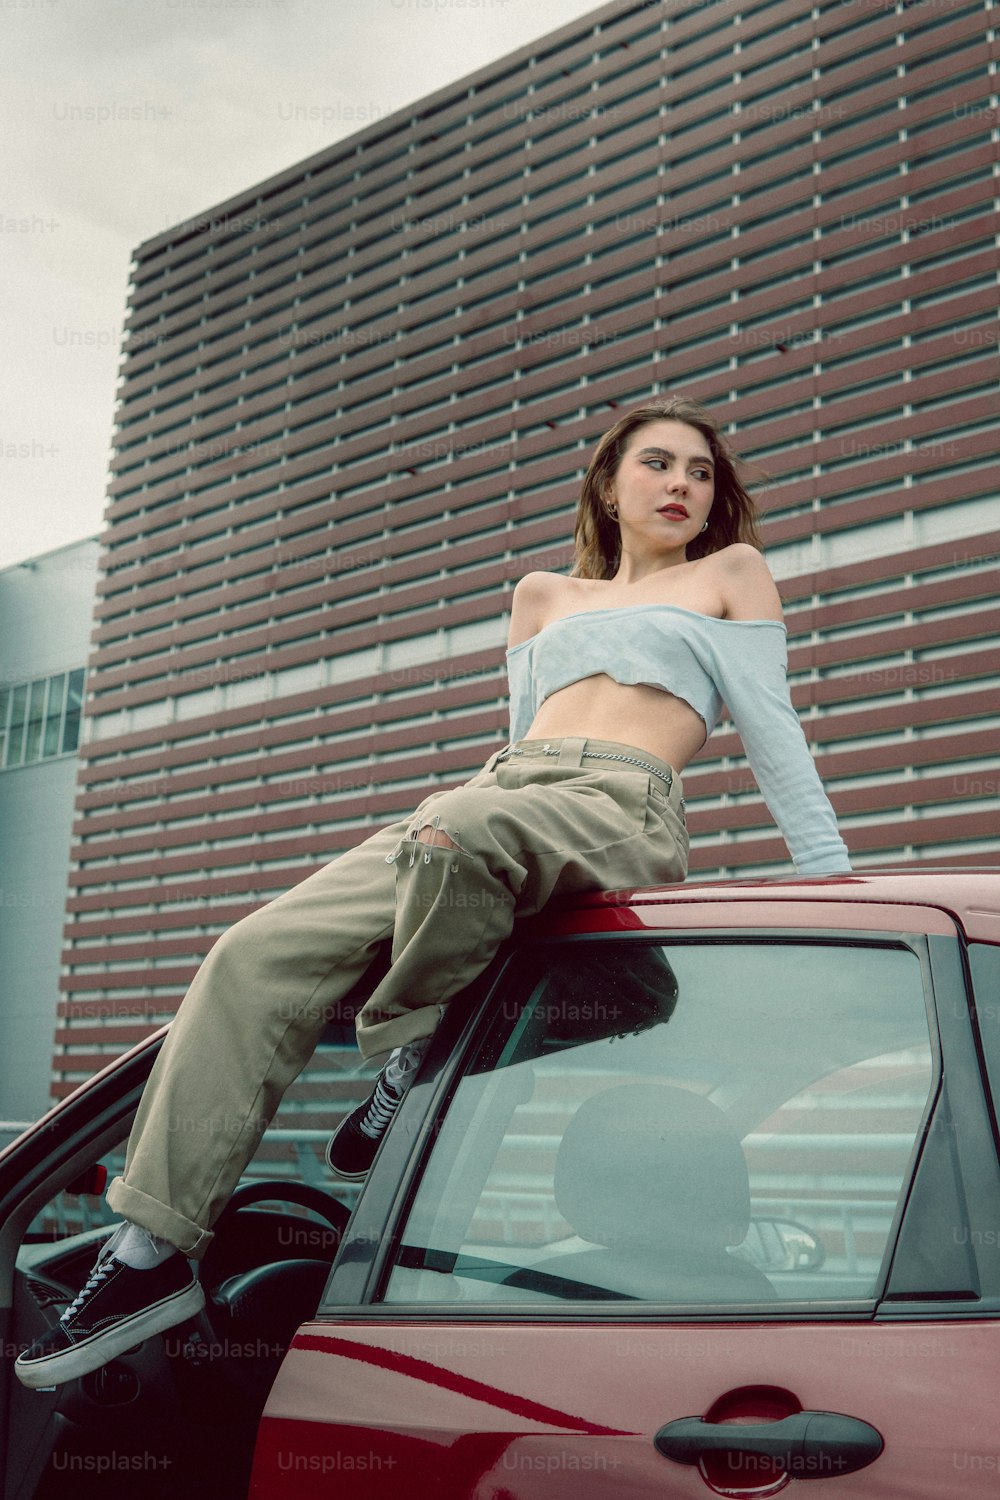 a person sitting on a car